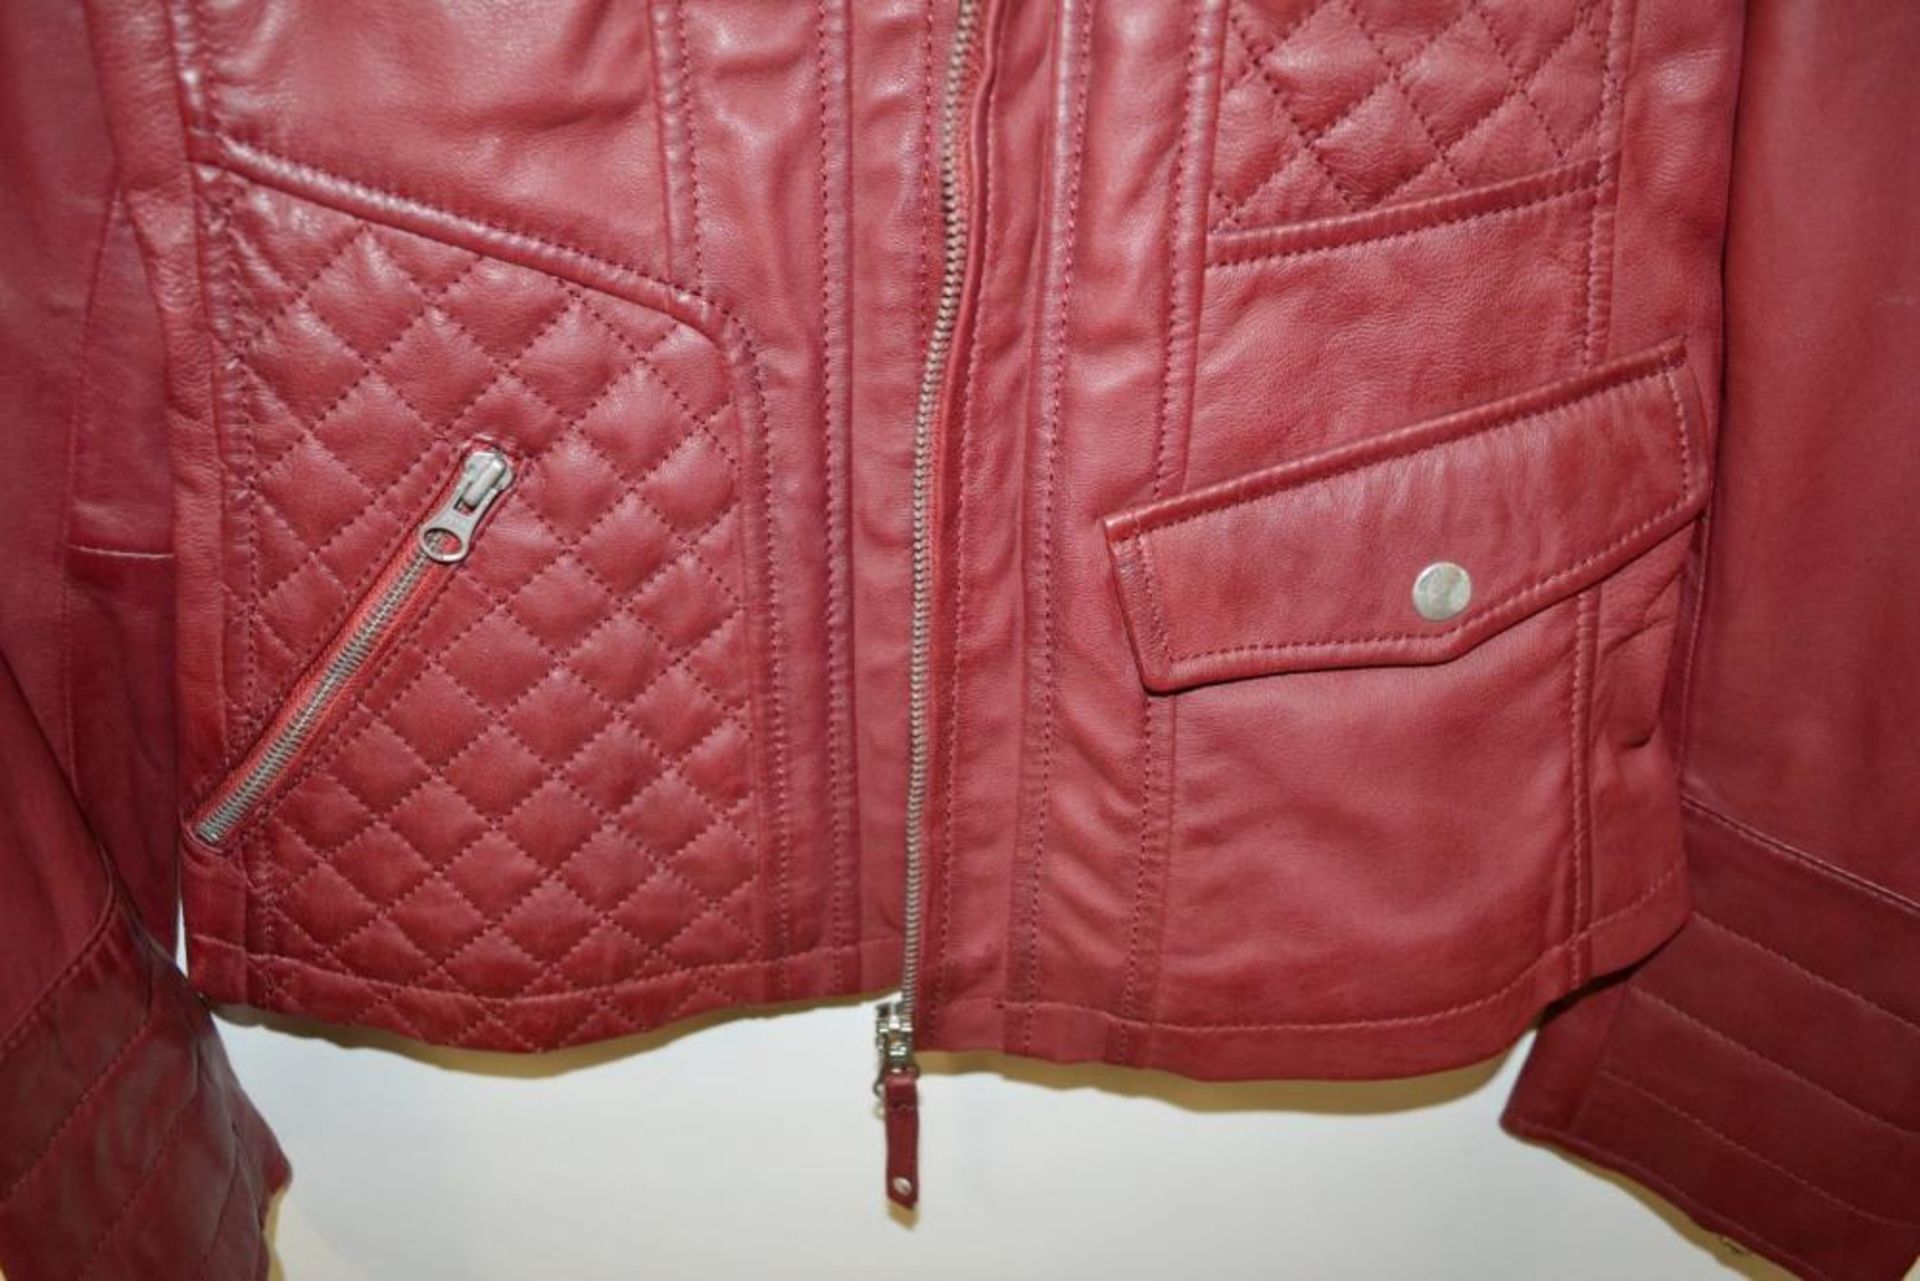 1 x Steilmann Bright Red Fine Leather Biker Jacket - Features Zipped Pockets And Padded Panels - CL2 - Image 3 of 7